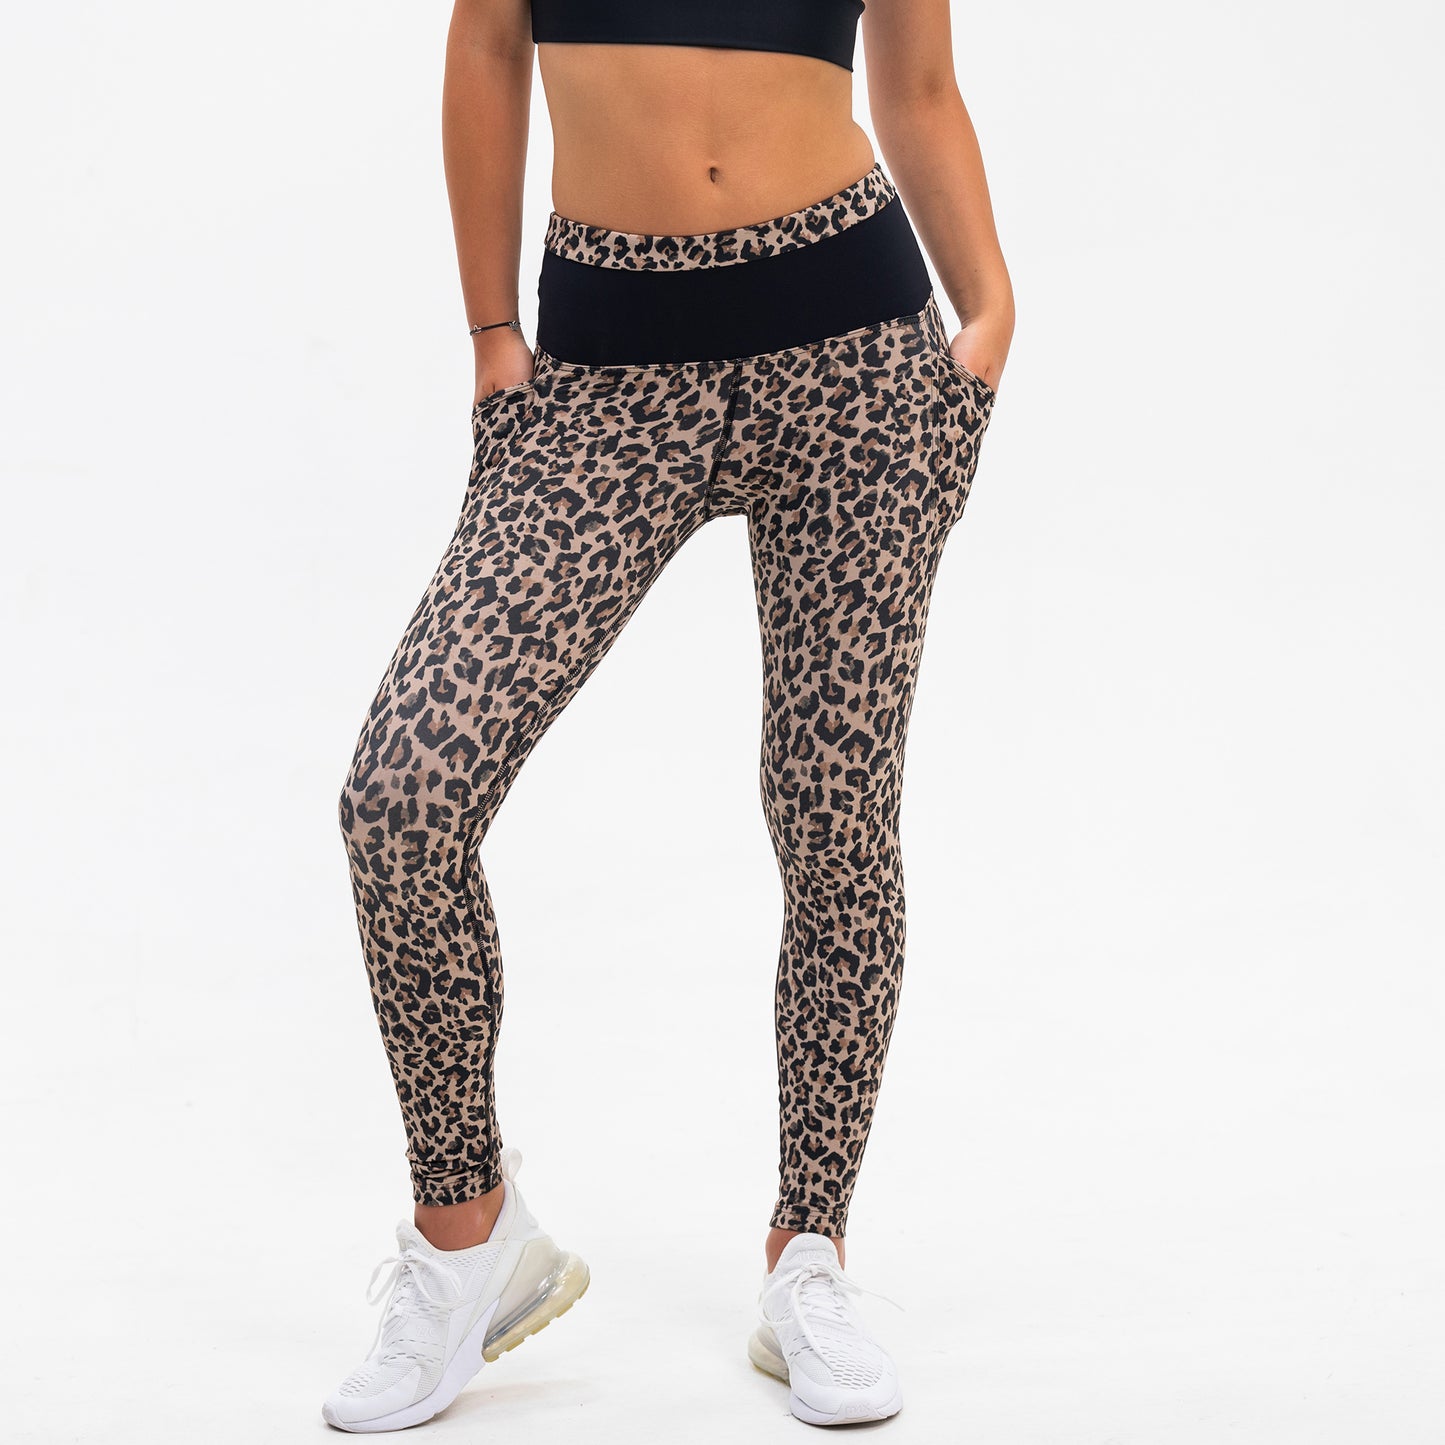 Full Length Womens Compression Leopard Print Leggings with pocket